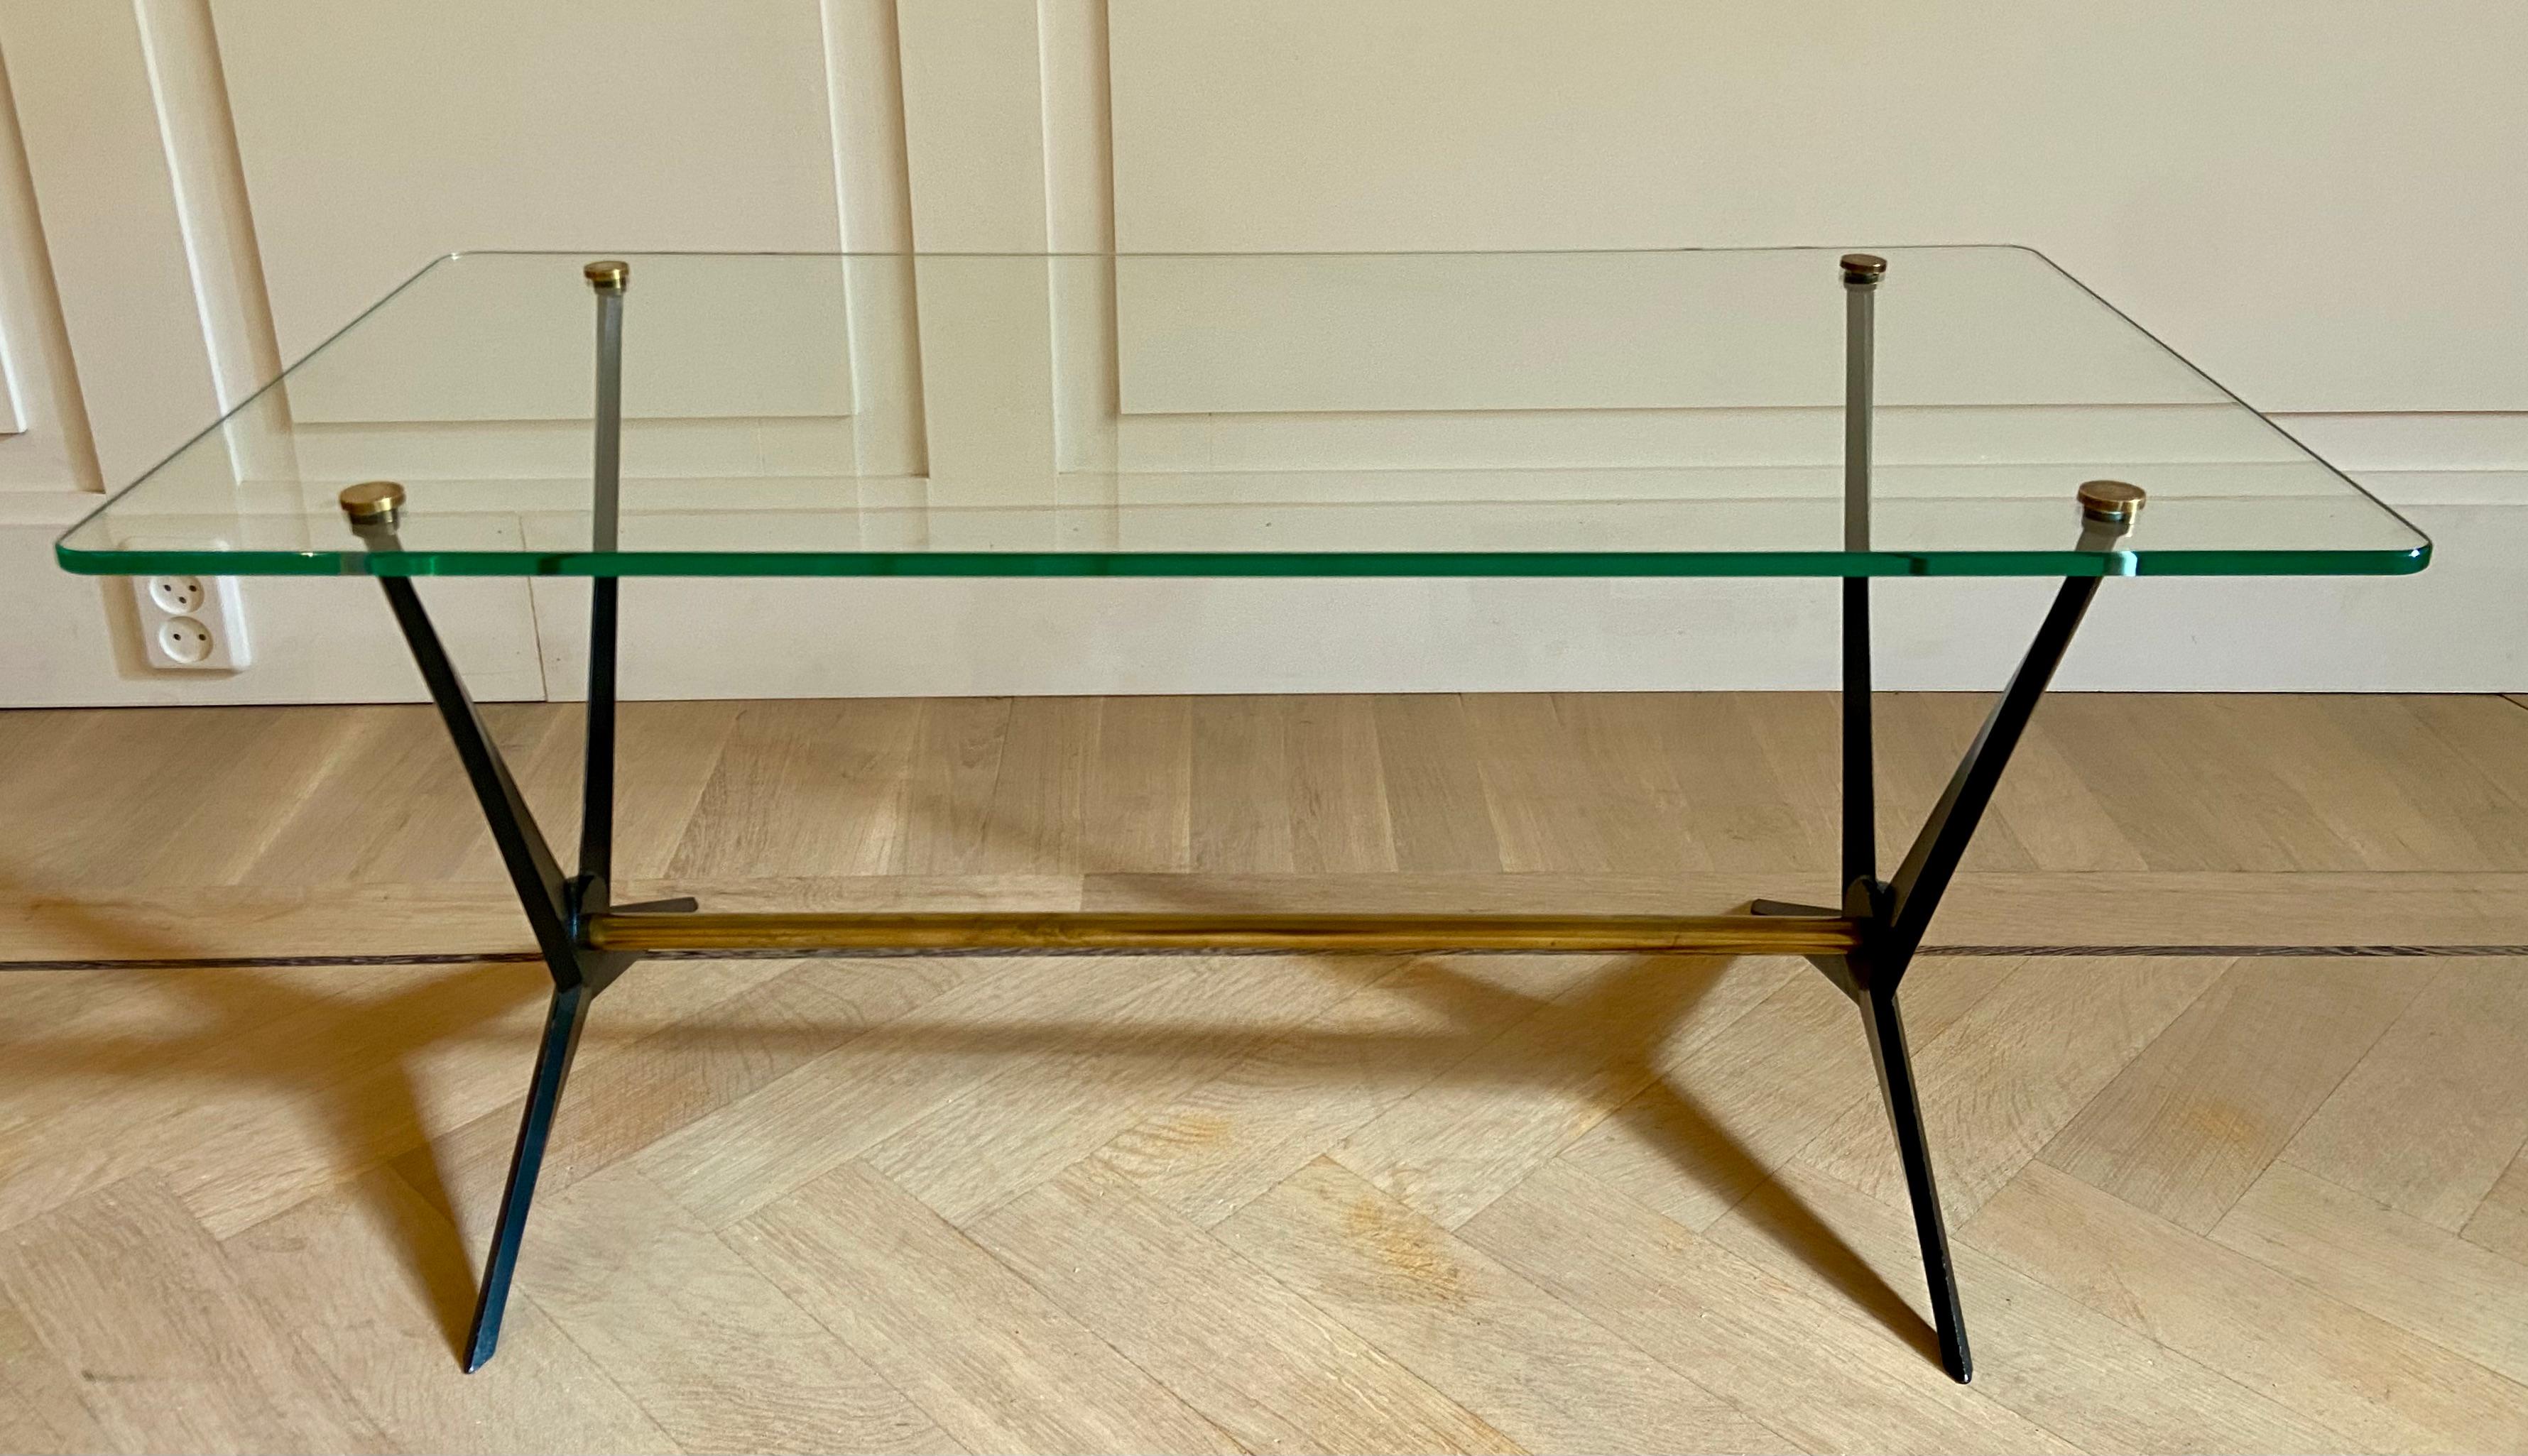 Coffee table by Angelo Ostuni. Angular black enameled aluminium frame
with brass embellishments. Attached square glass is pierced and capped with four round brass caps.